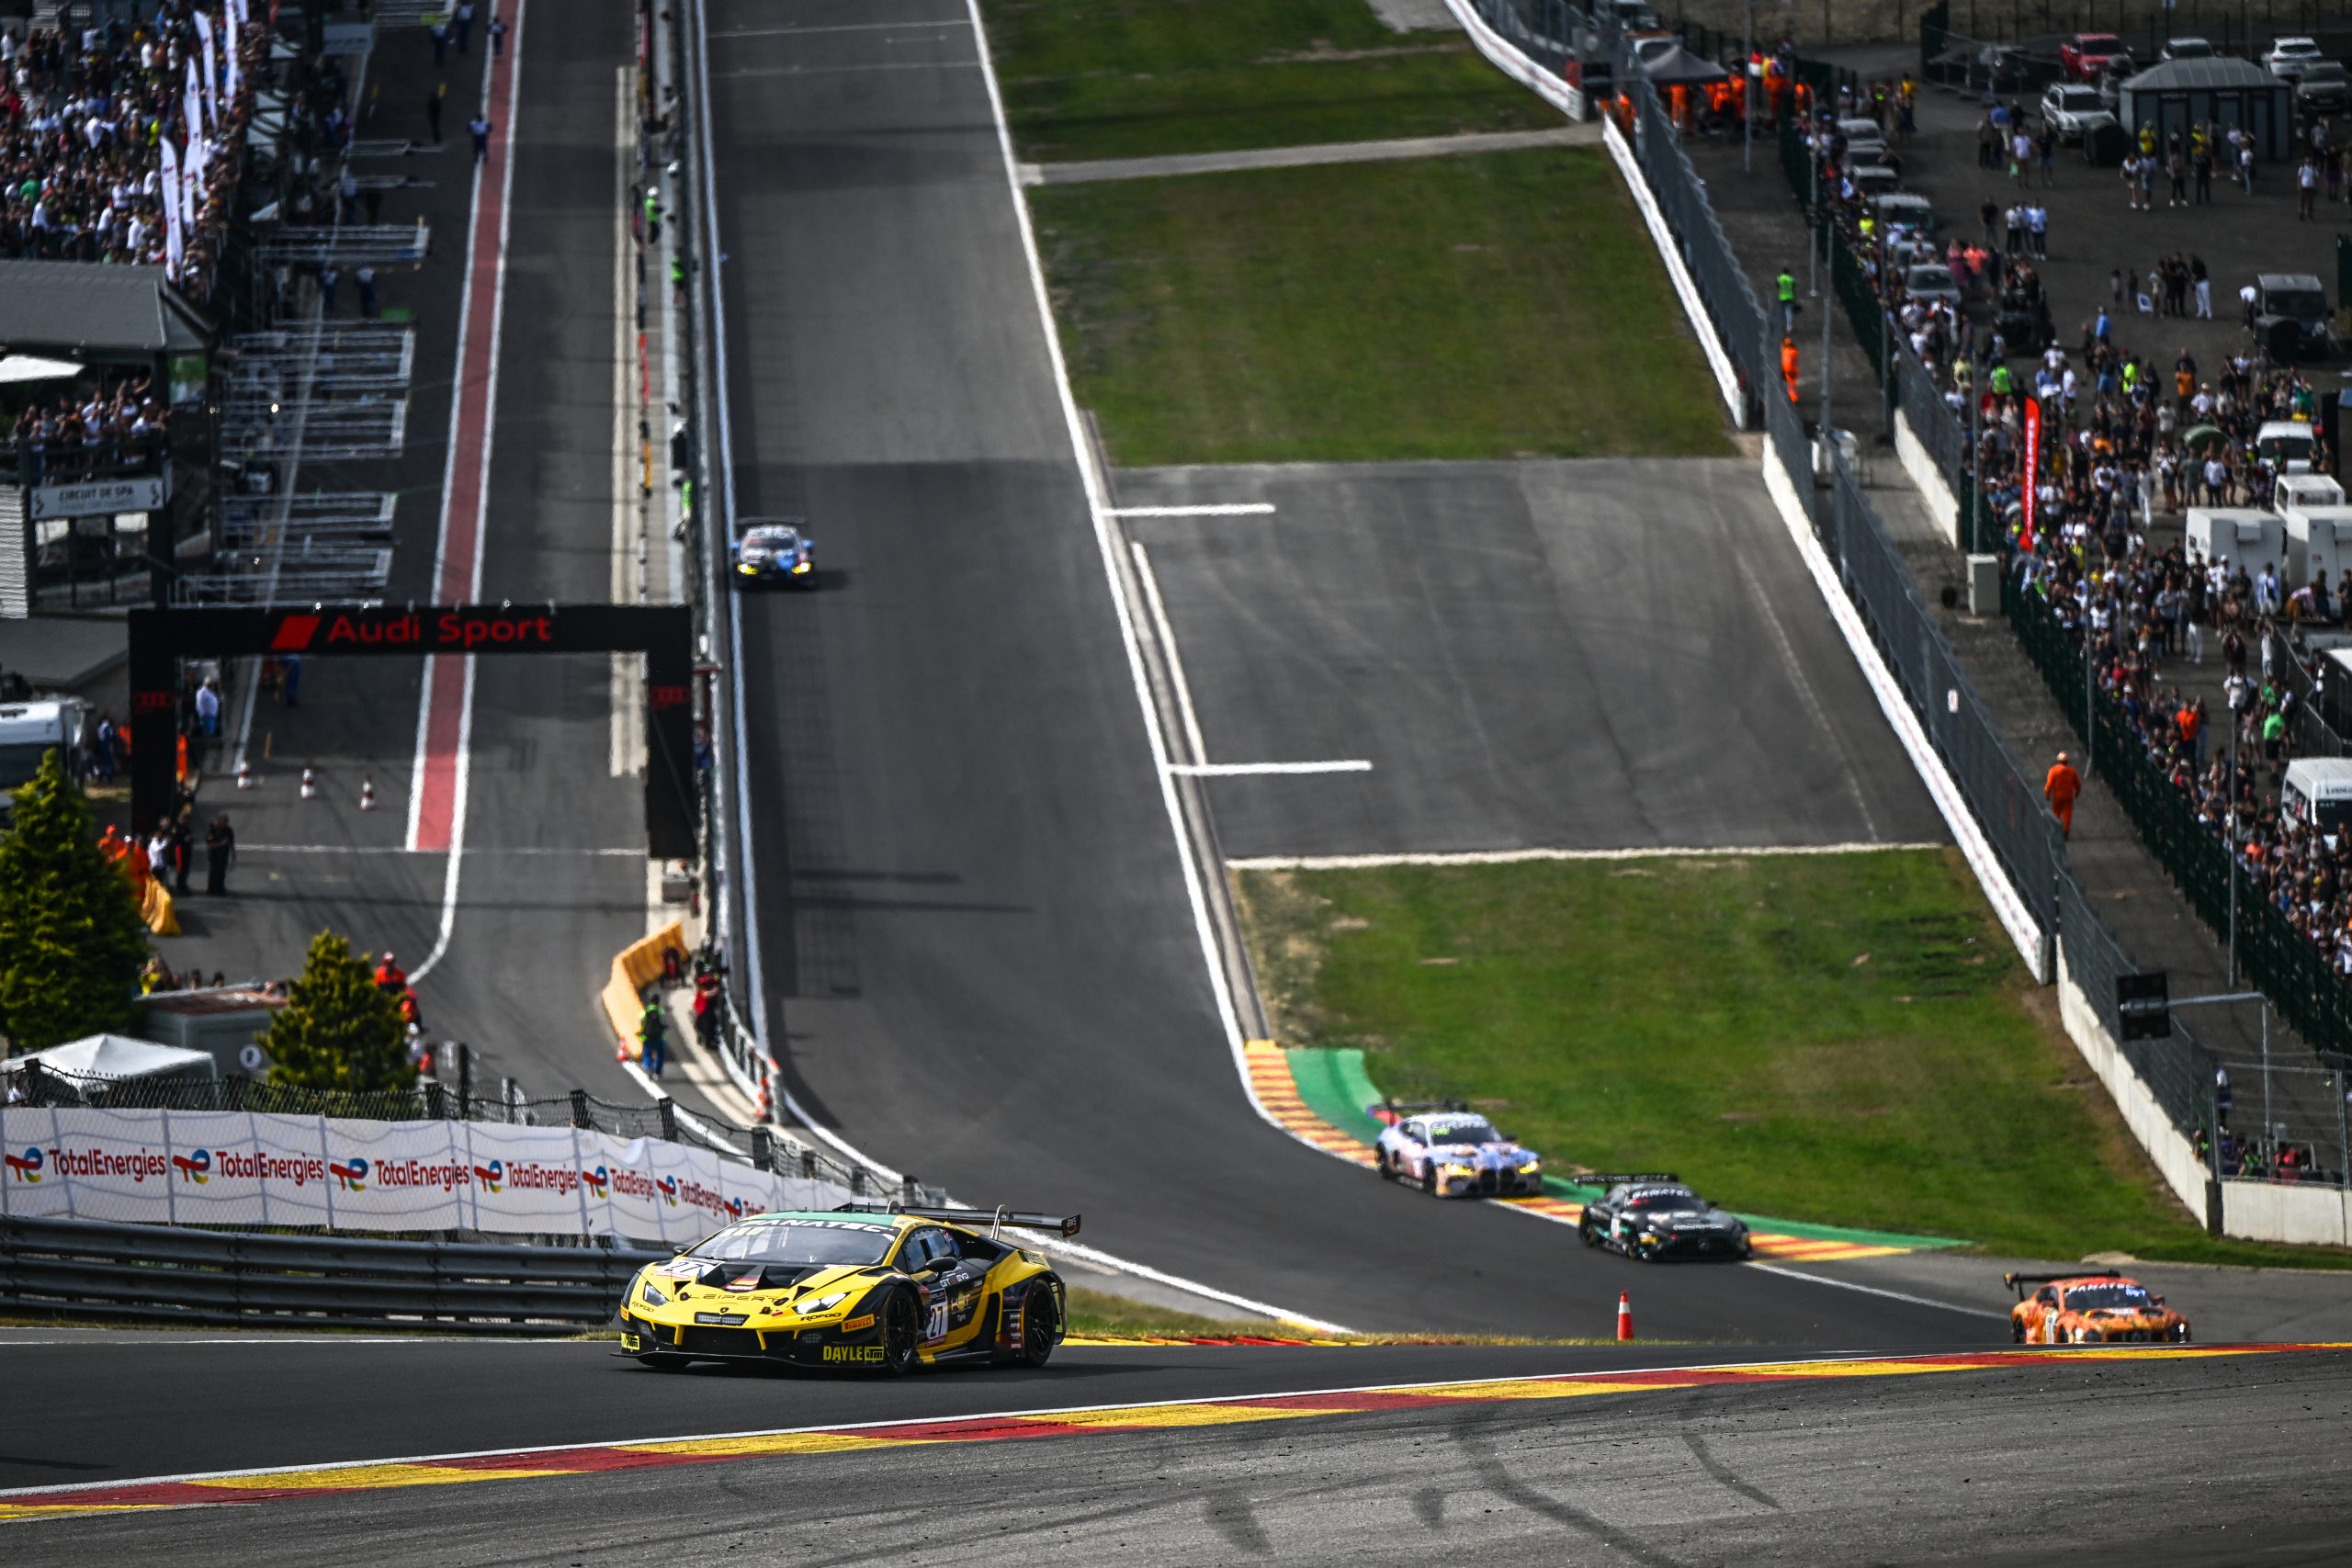 Fanatec GT World Challenge 24h Spa: An early exit for Leipert Motorsport in the Lamborghini GT3 after a brilliant chase to catch up